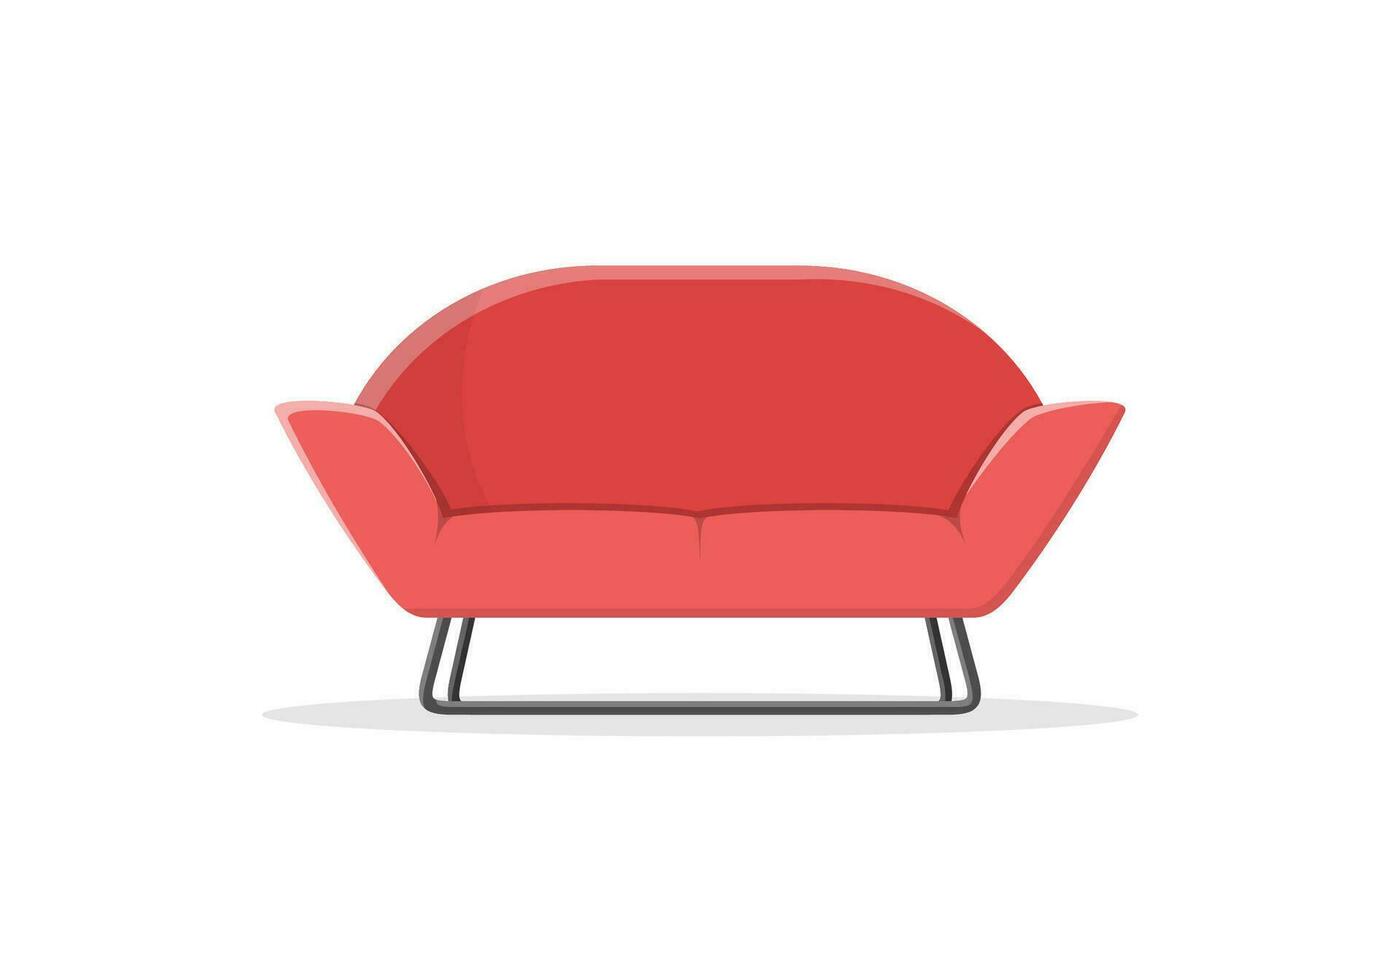 Stylish comfortable sofa in flat style isolated on white background. Couch interior of a living room or office. Soft furniture for rest and relaxation home. Vector illustration.